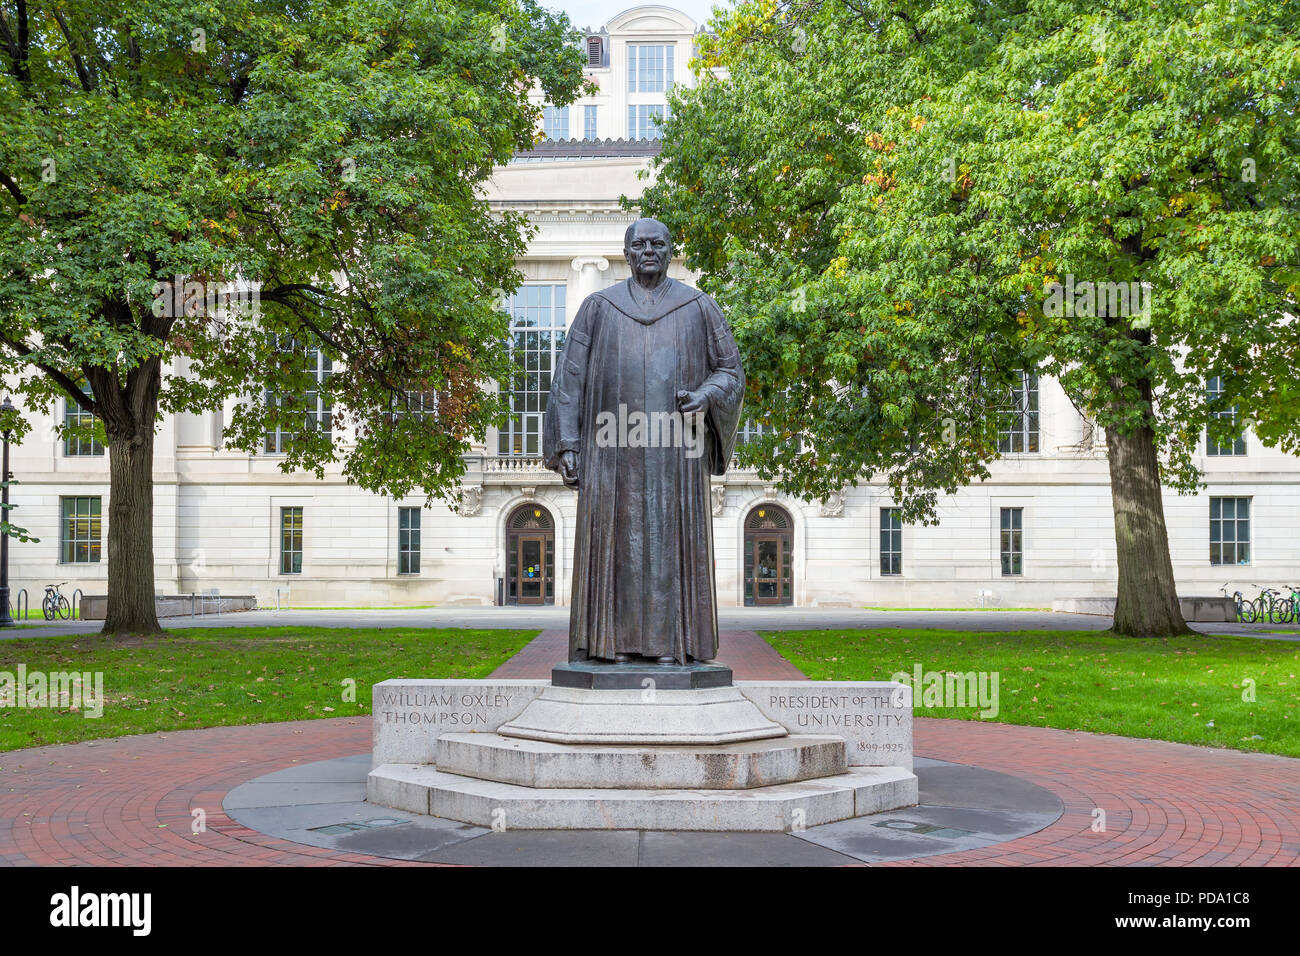 COLUMBUS, OH/USA - OCTOBER 21, 2017: William Oxley Thompson statue on the campus of The Ohio State University. Stock Photo